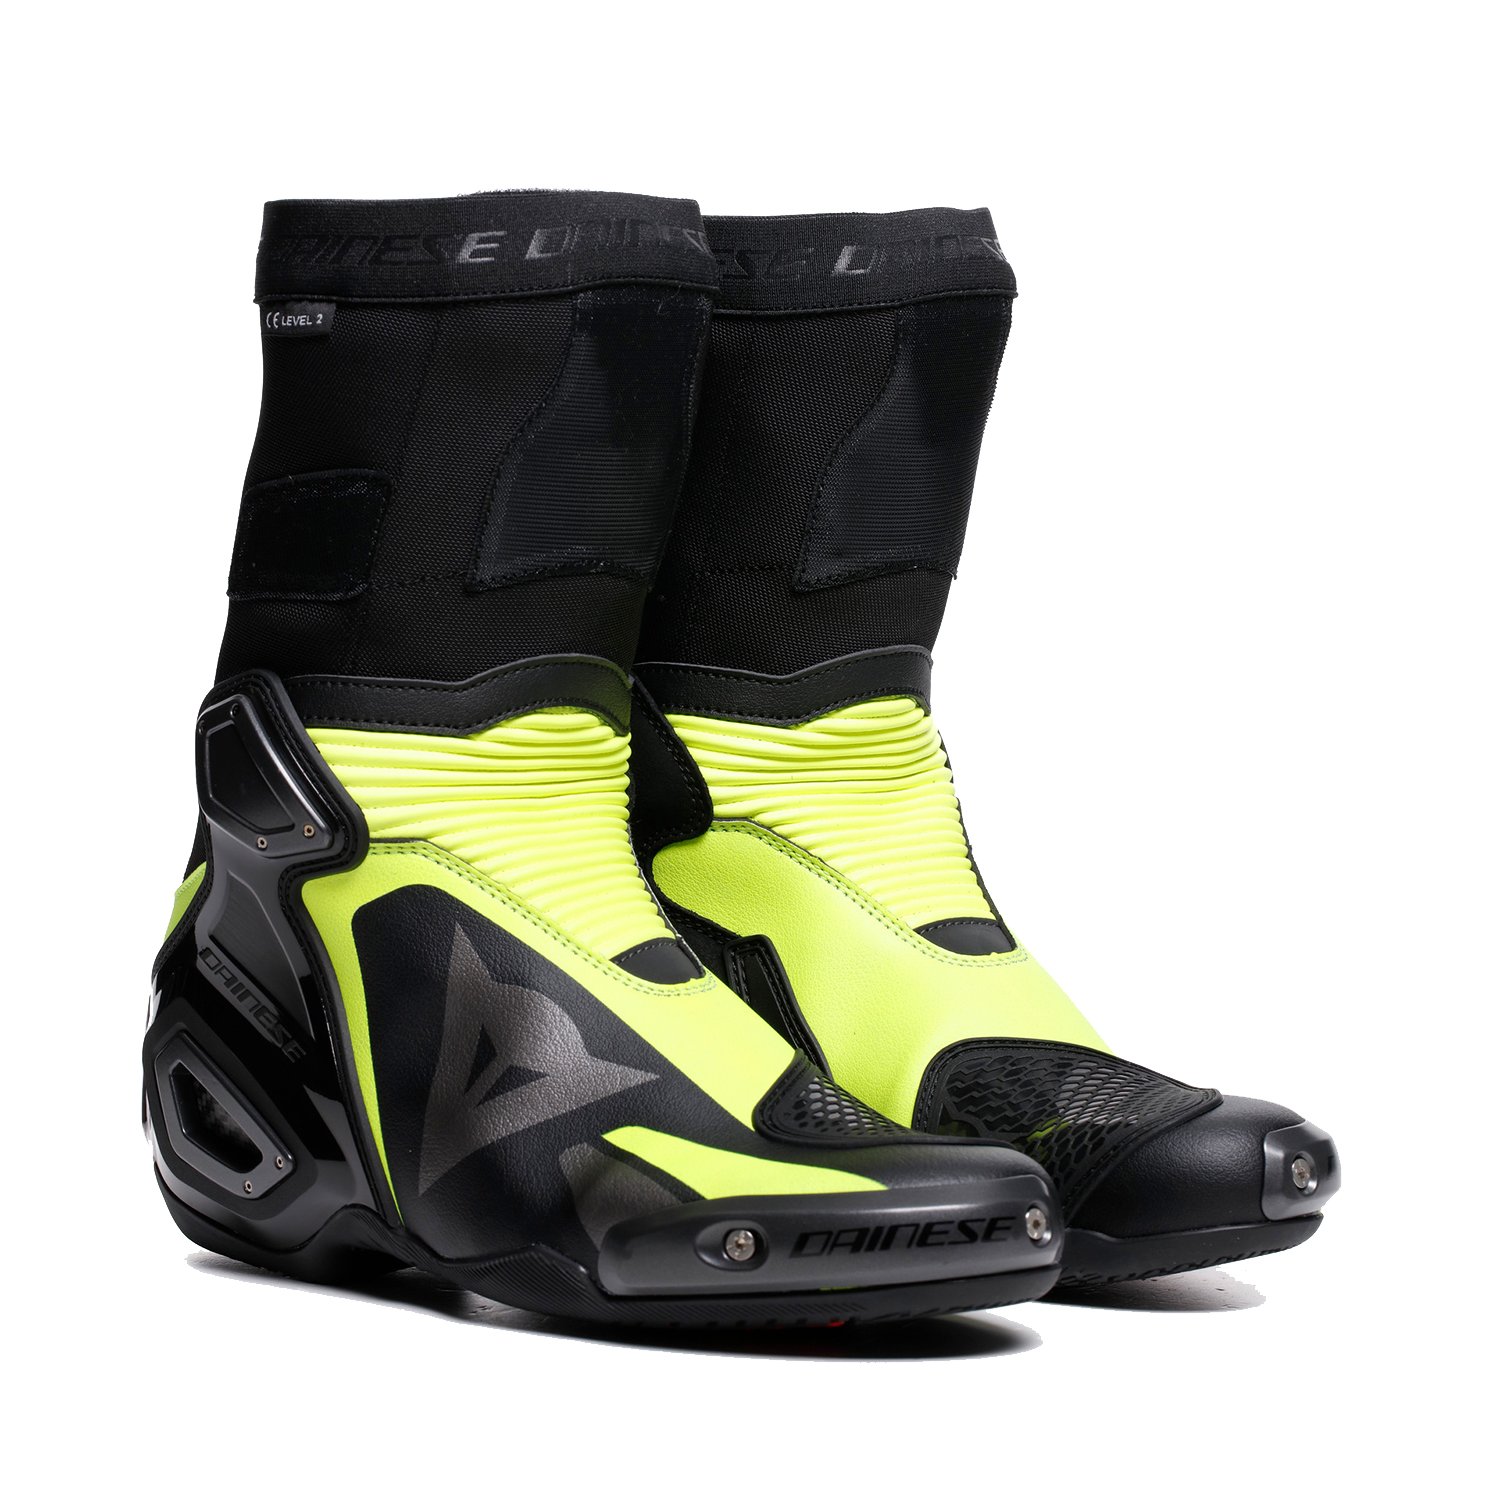 Image of Dainese Axial 2 Boots Black Yellow Fluo Größe 43